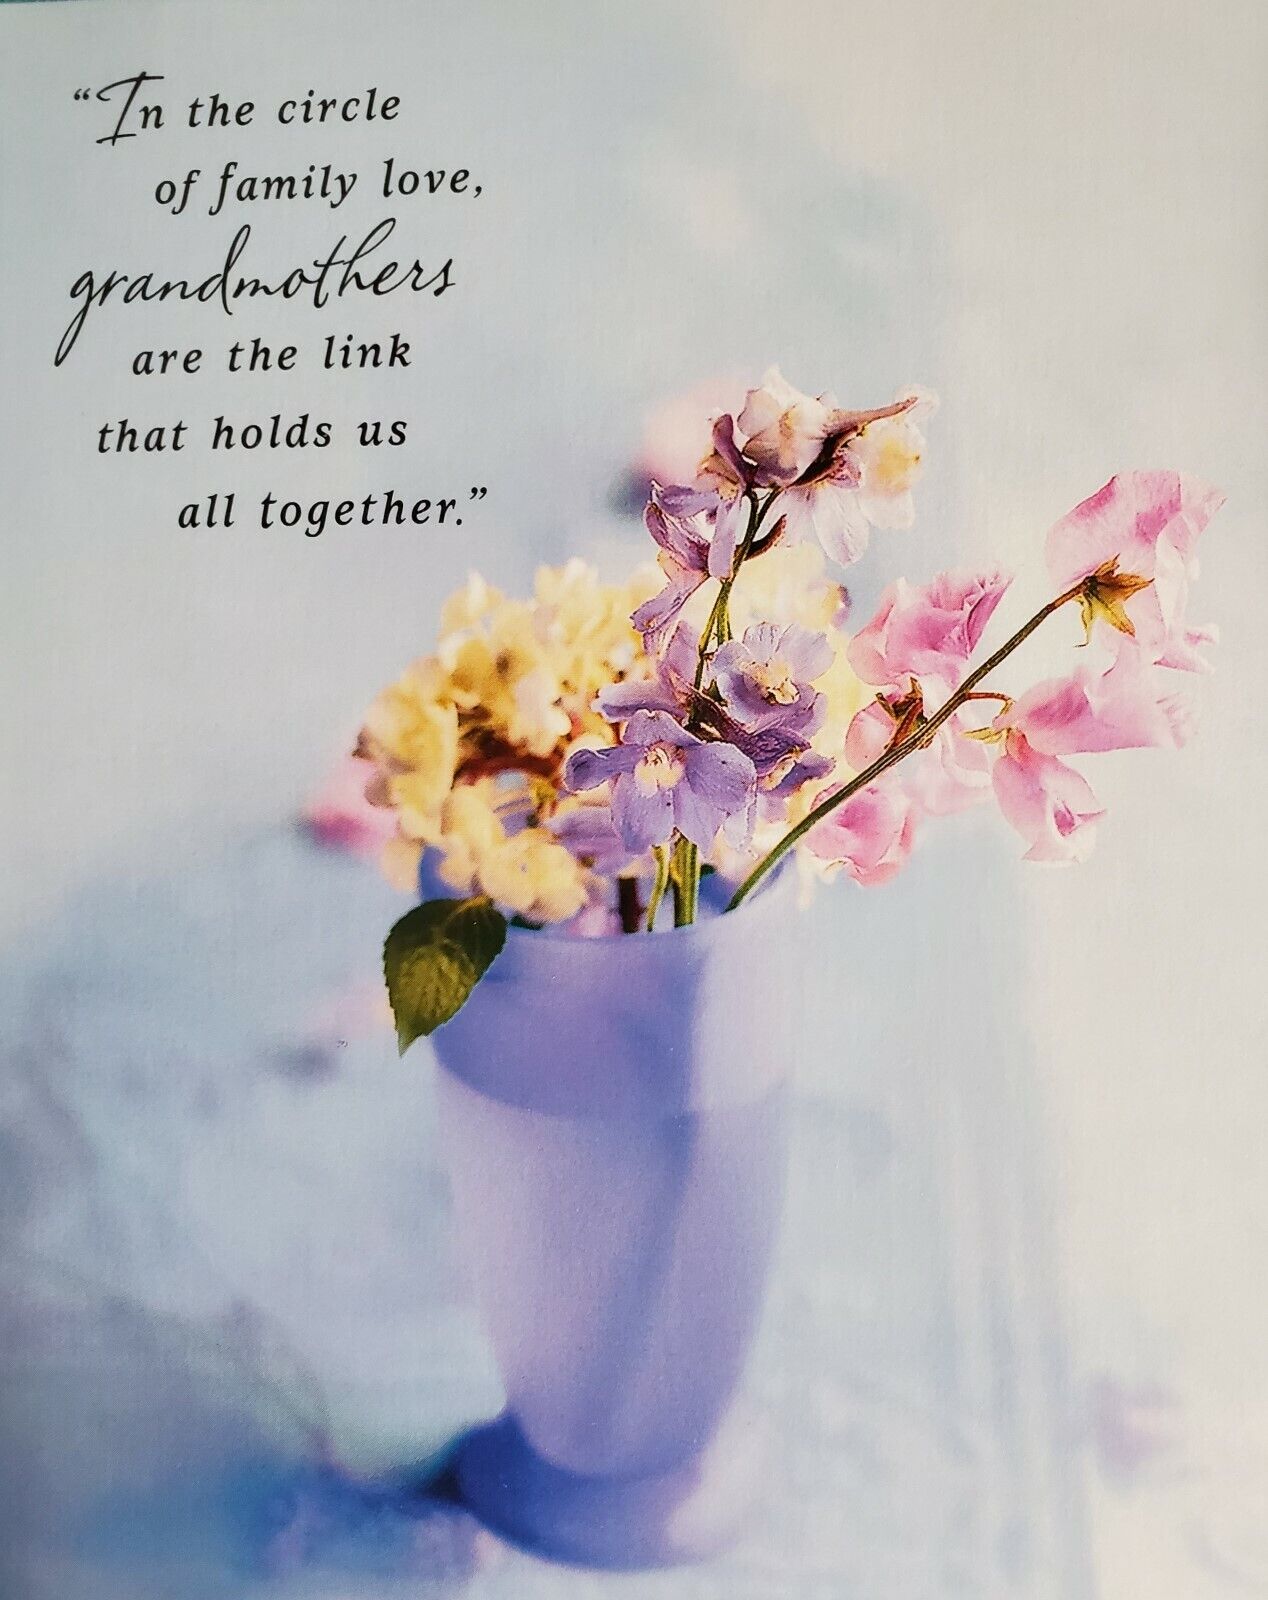 'Grandmothers are the link that hold us together' Mother's Day greeting card